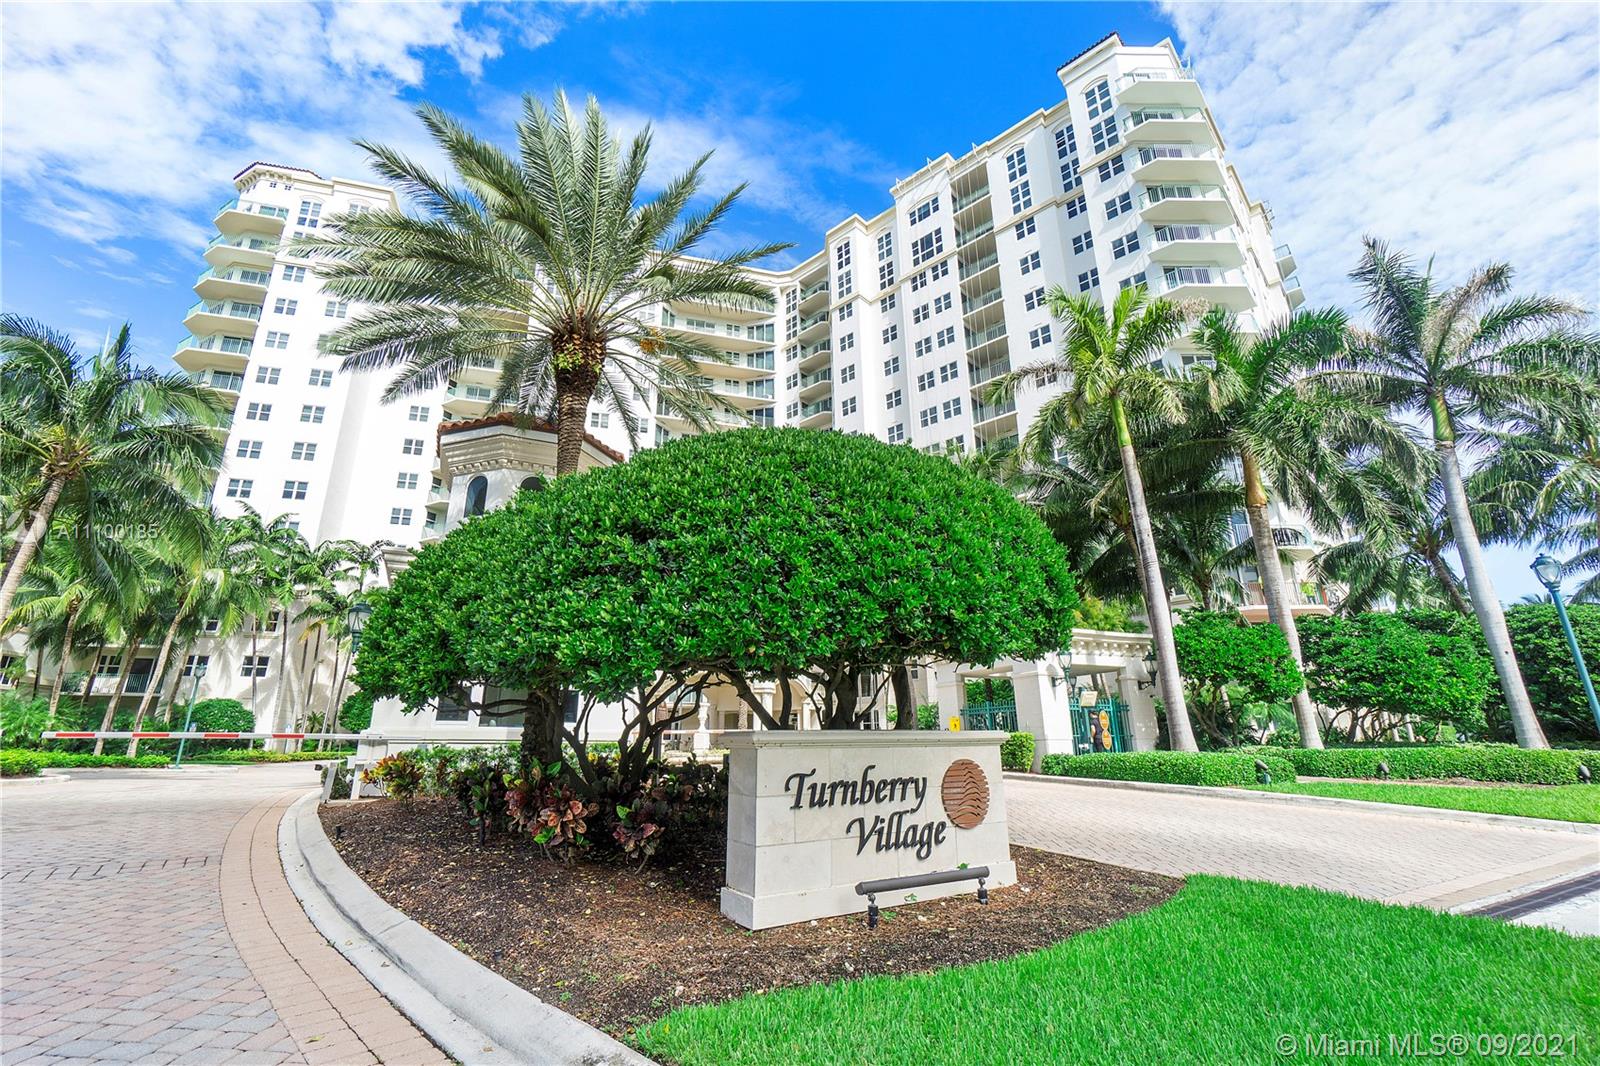 Photo 29 of Turnberry Vlg No Tower Co Apt 1002 in Aventura - MLS A11100185